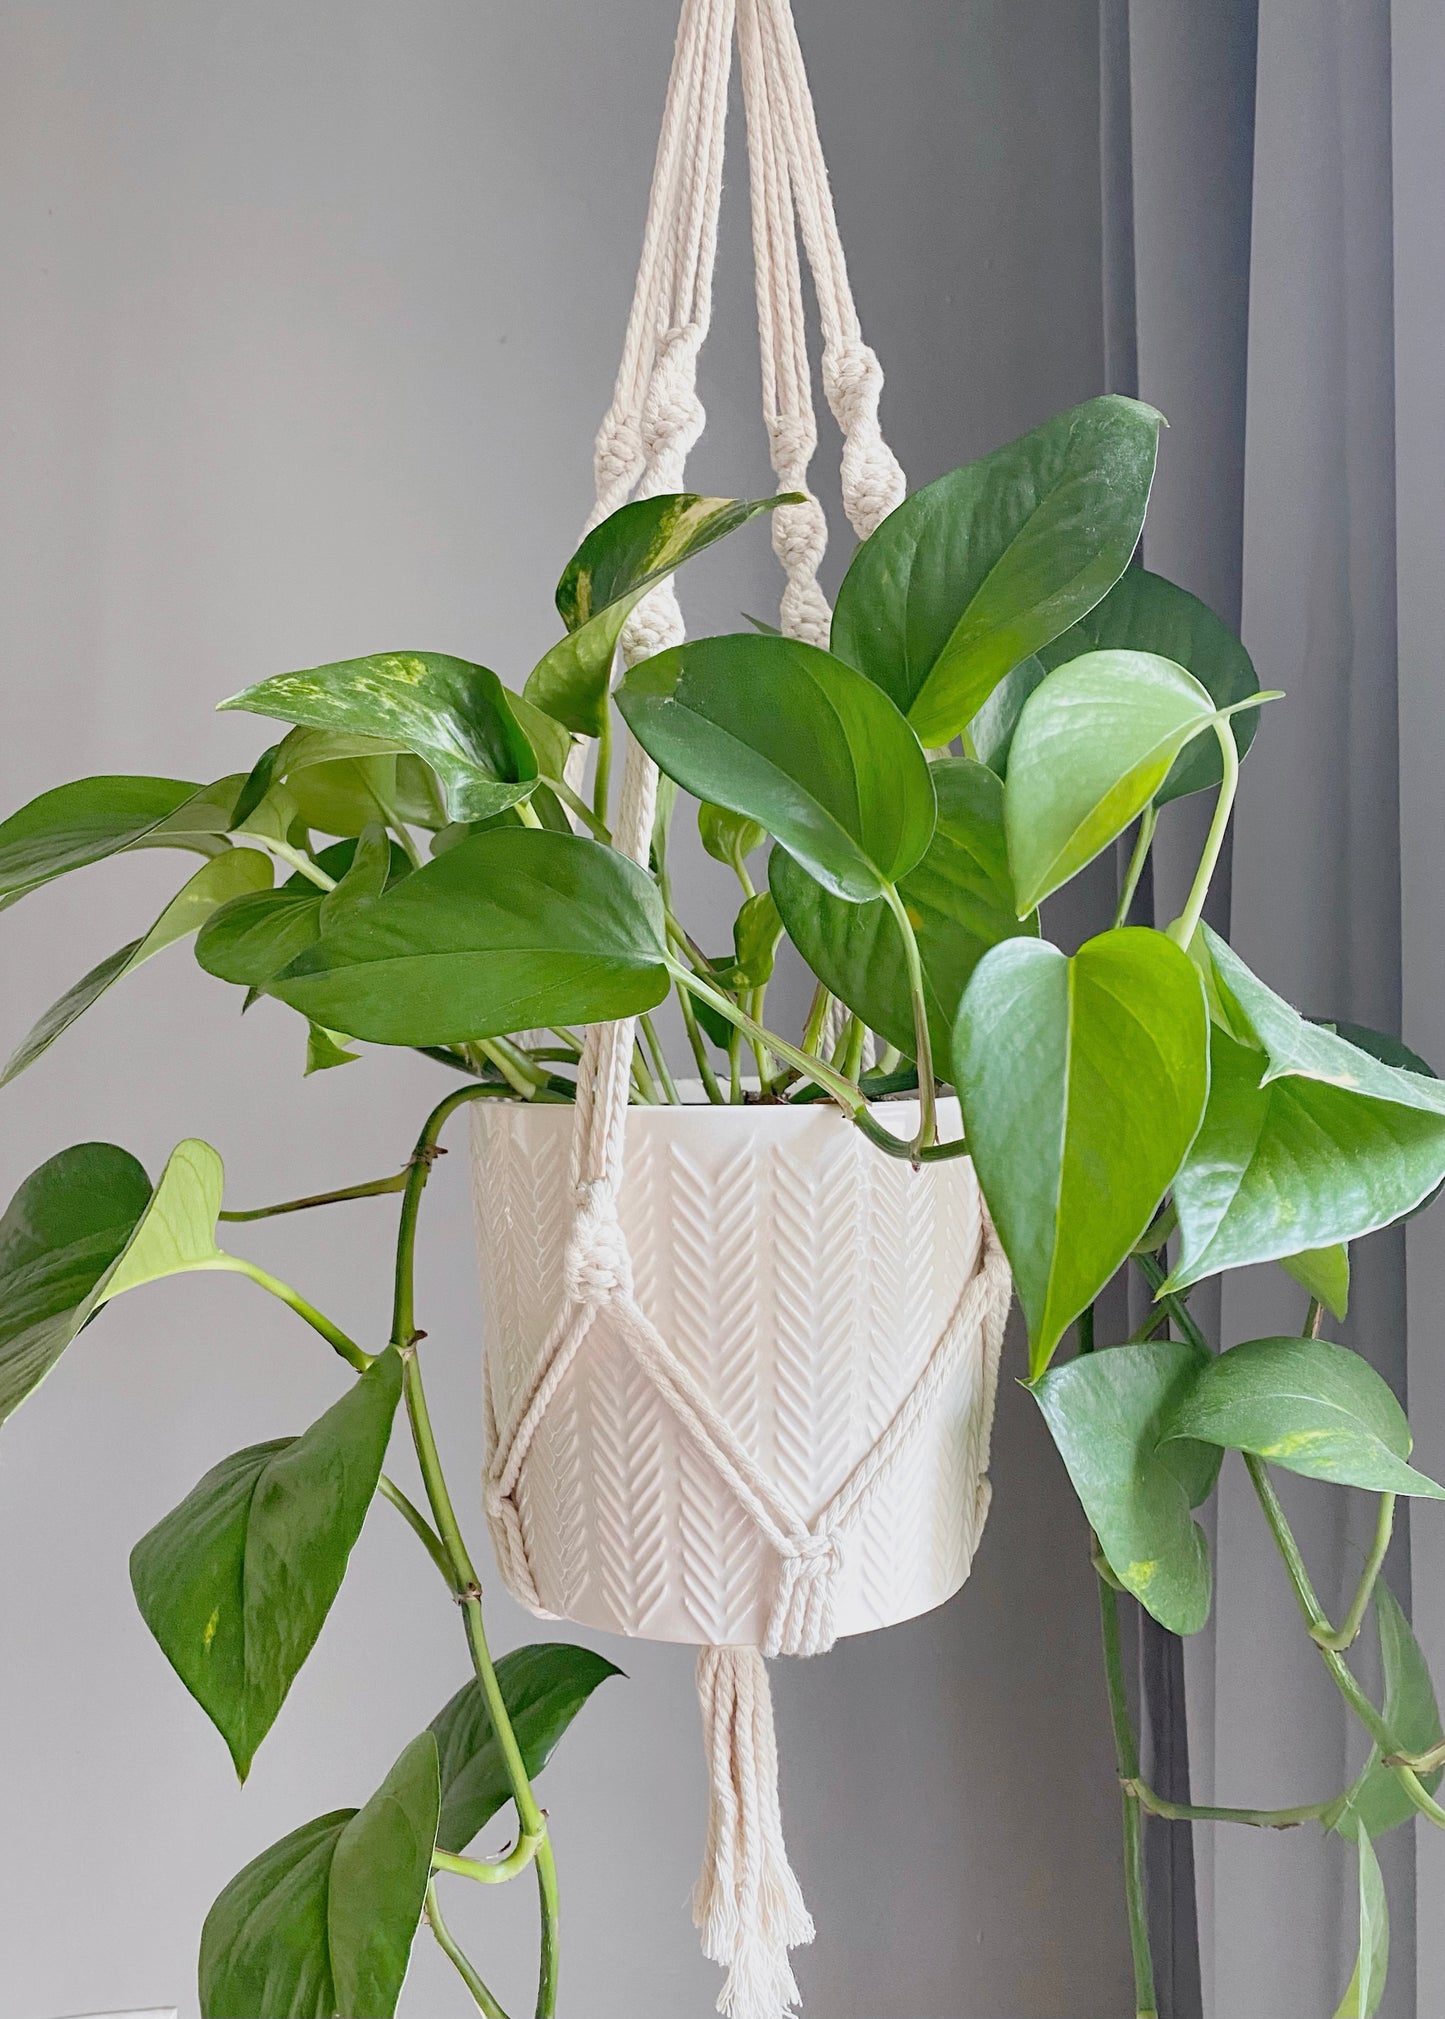 Create more space in your home and suspend your urban jungle with a ready to hang, handmade, boho double macrame plant hanger. This hanger is perfect for high ceilings! Great for indoors or outdoors, just add your favorite plants!